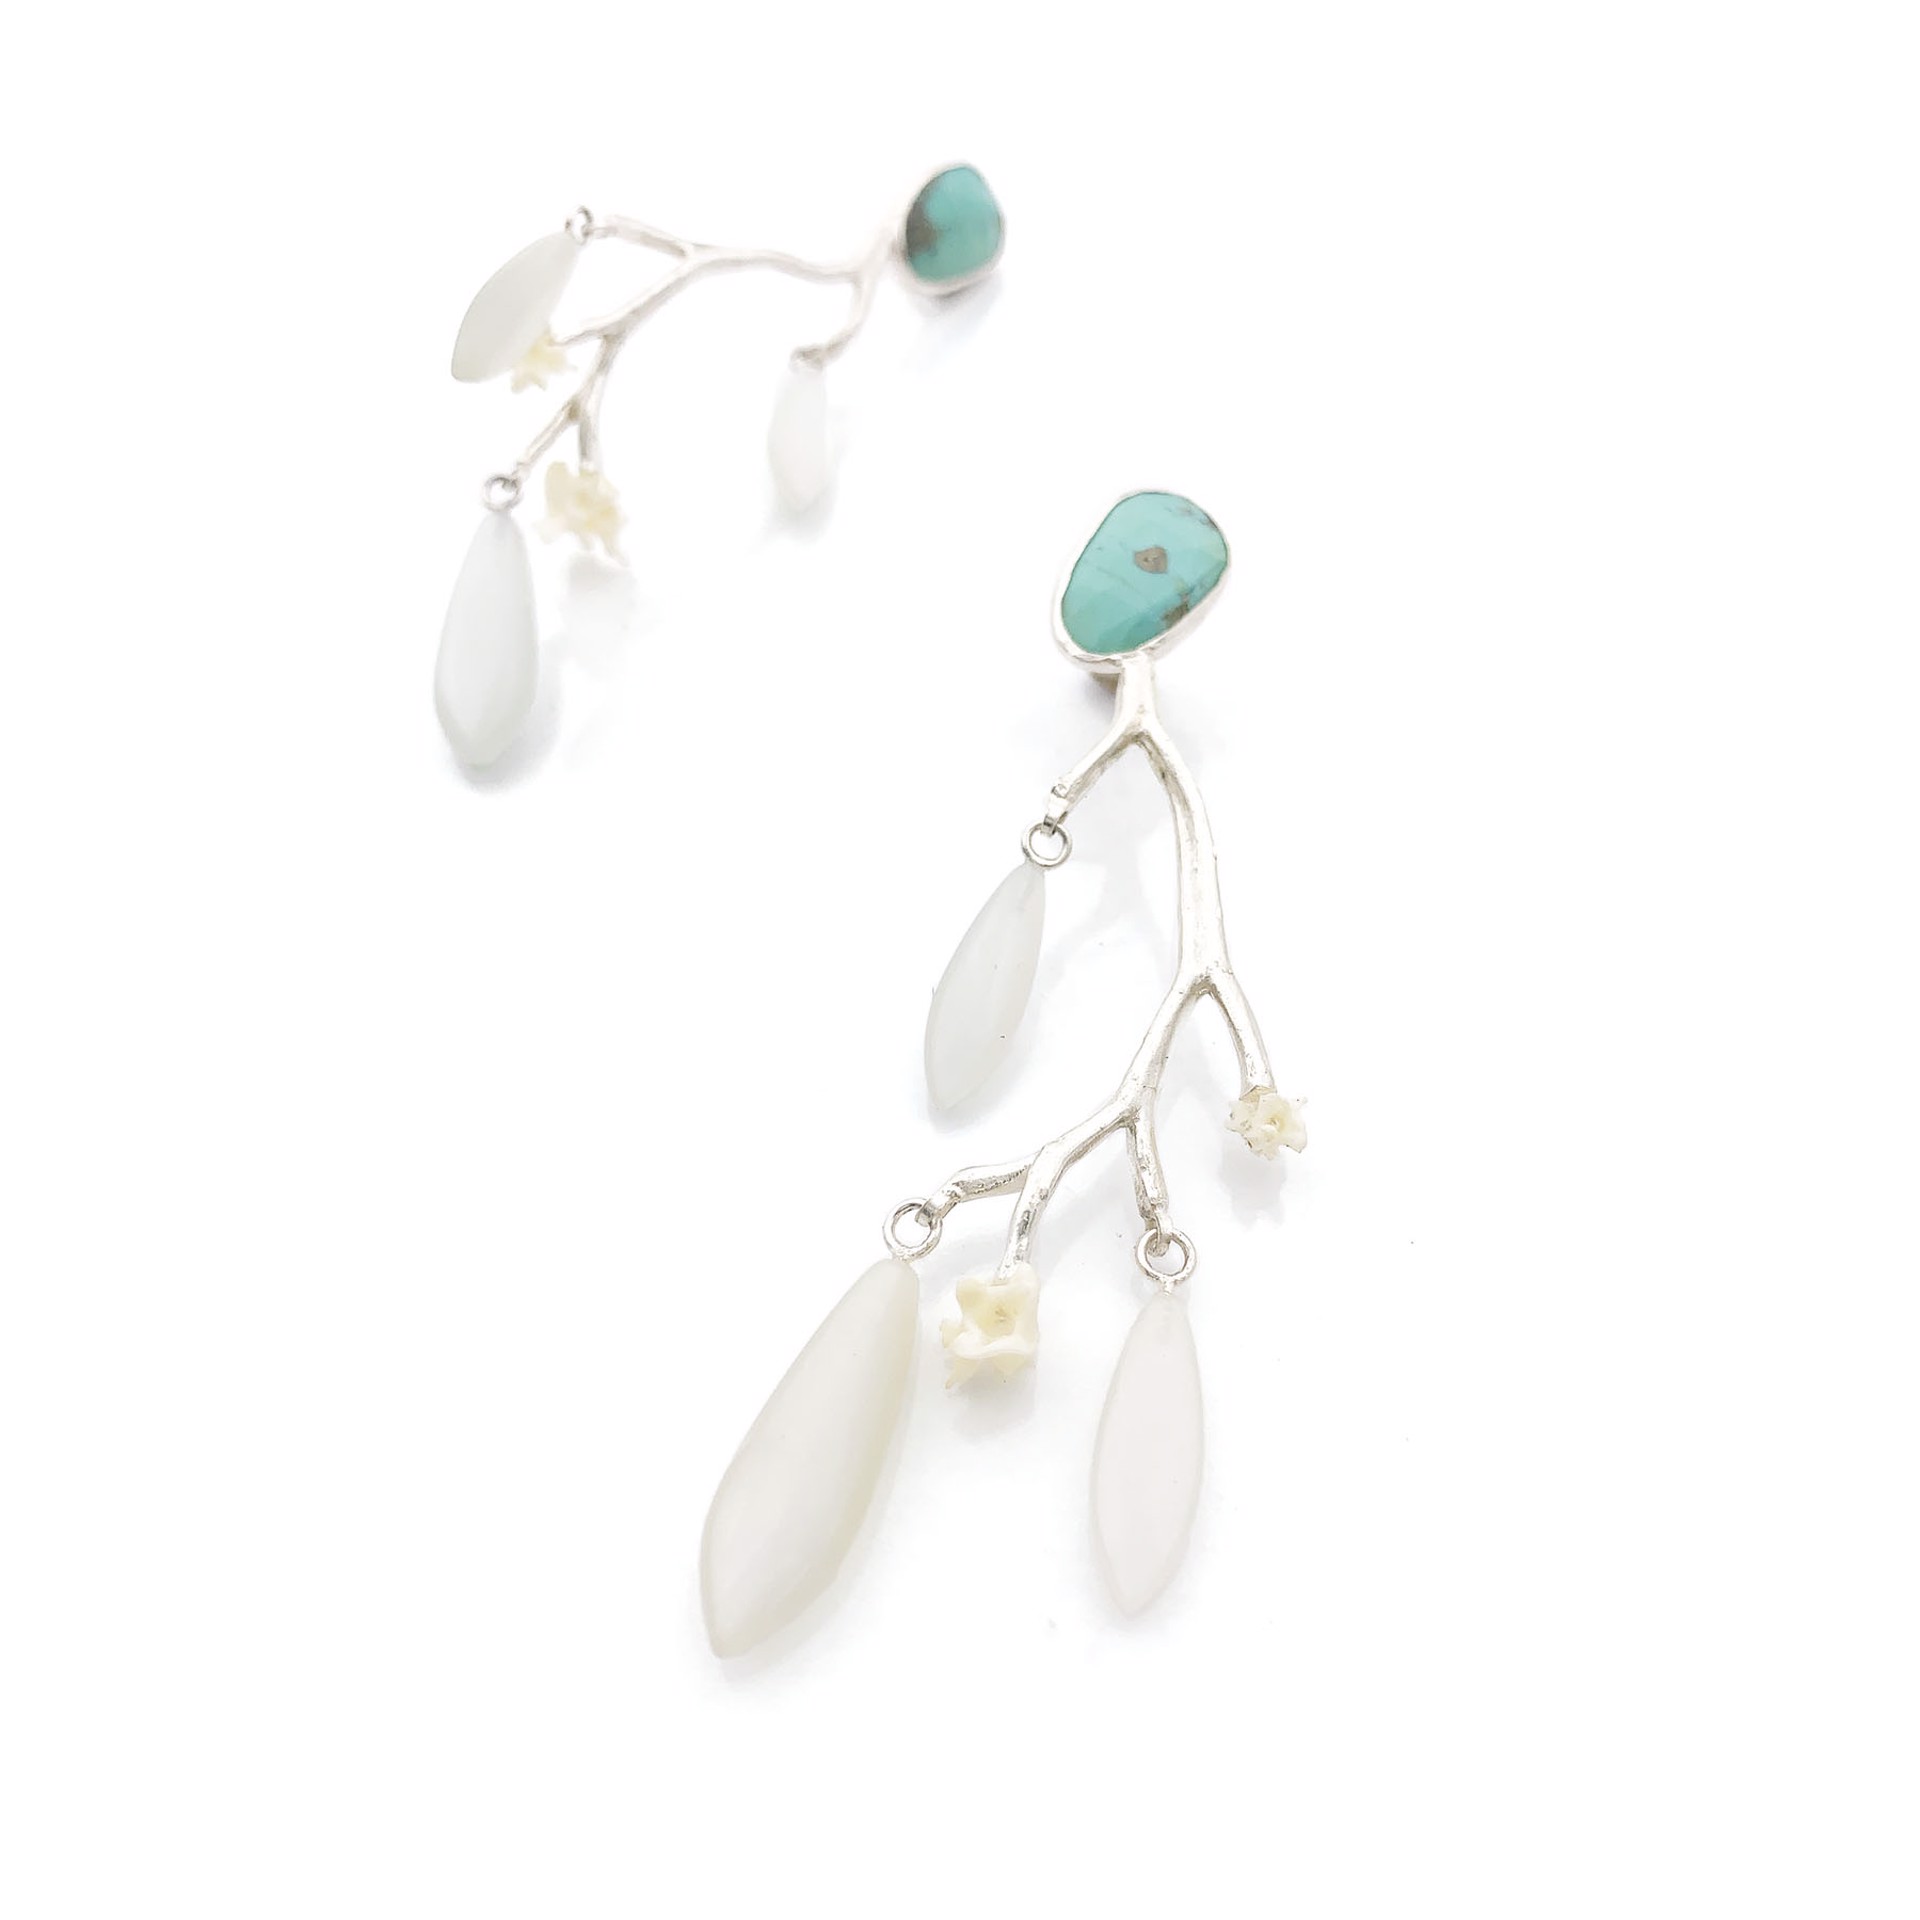 Tourquoise Lilo Earrings by Anna Johnson